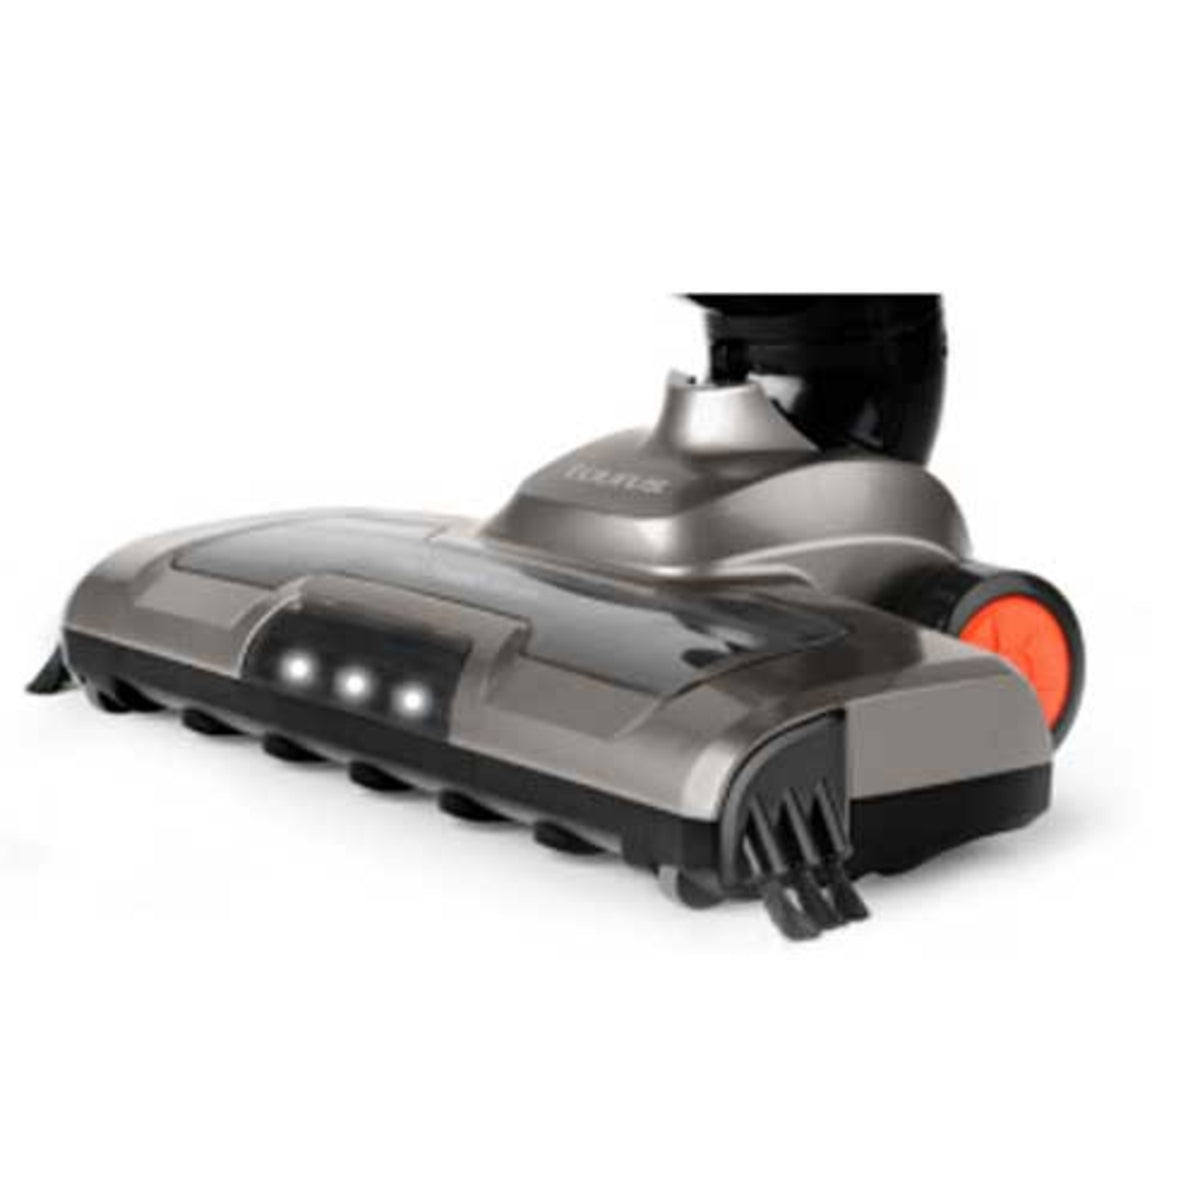 Aspirateur à batterie Rowenta AirForce Extreme Silence 25.2V RS-2230001828